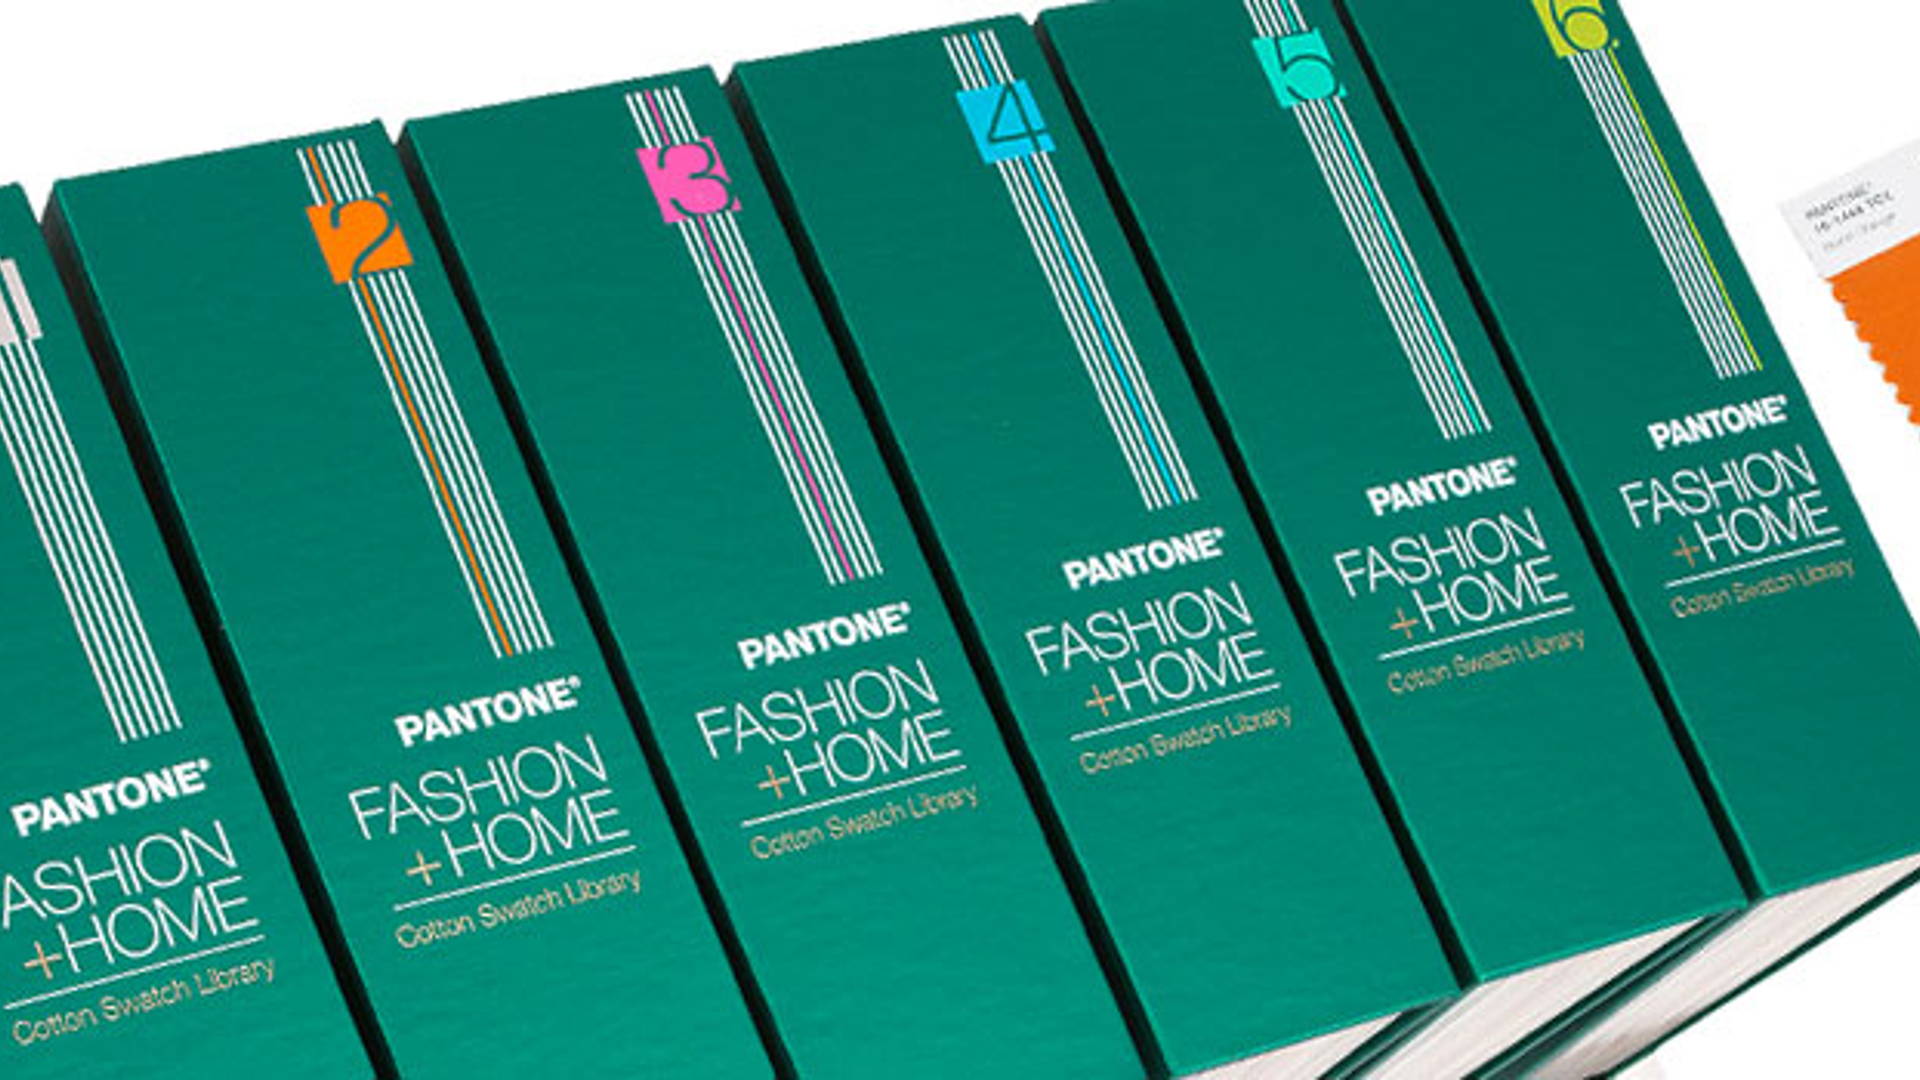 Featured image for Pantone PLUS+ Series and Fashion+Home Series